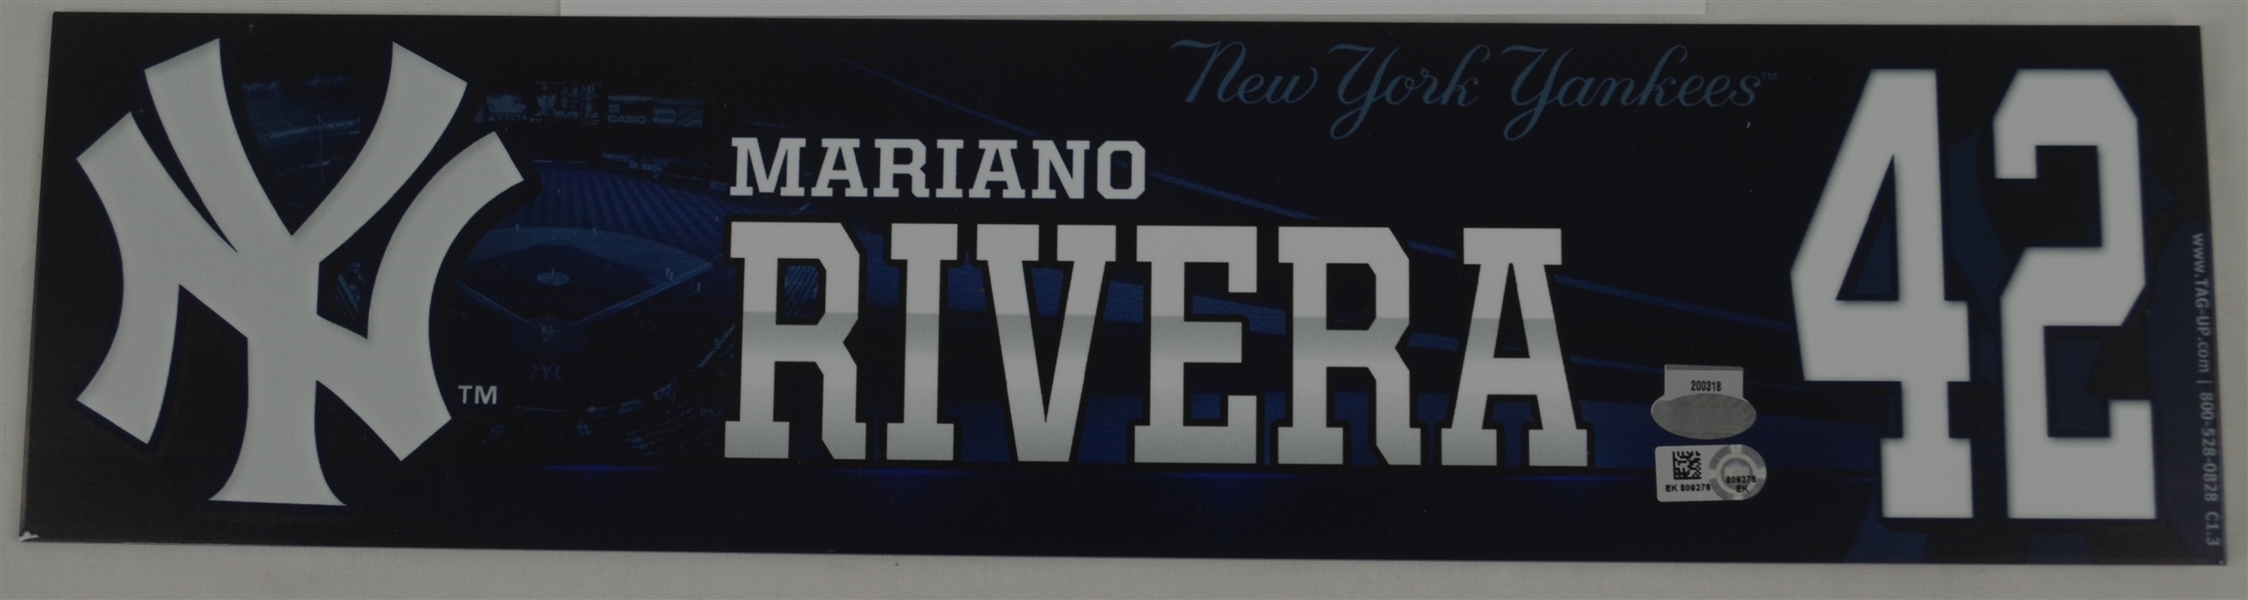 Mariano Rivera Locker Room Name Plate From His Last Game Played in NY 9/26/2013